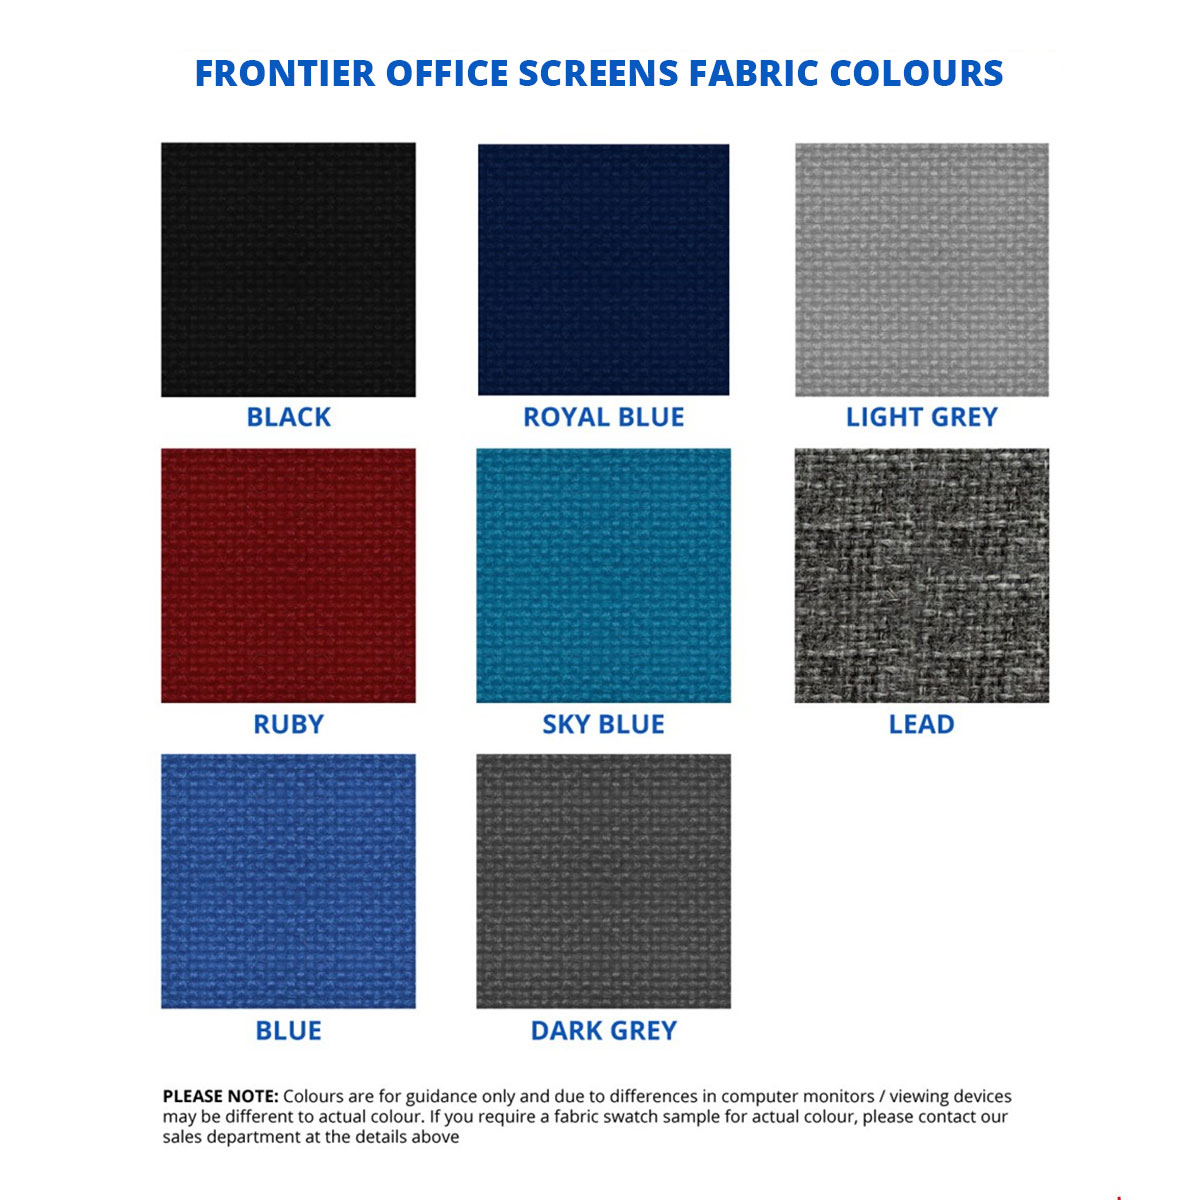 FRONTIER® Office Screens Are Available in 8 Fabric Colours